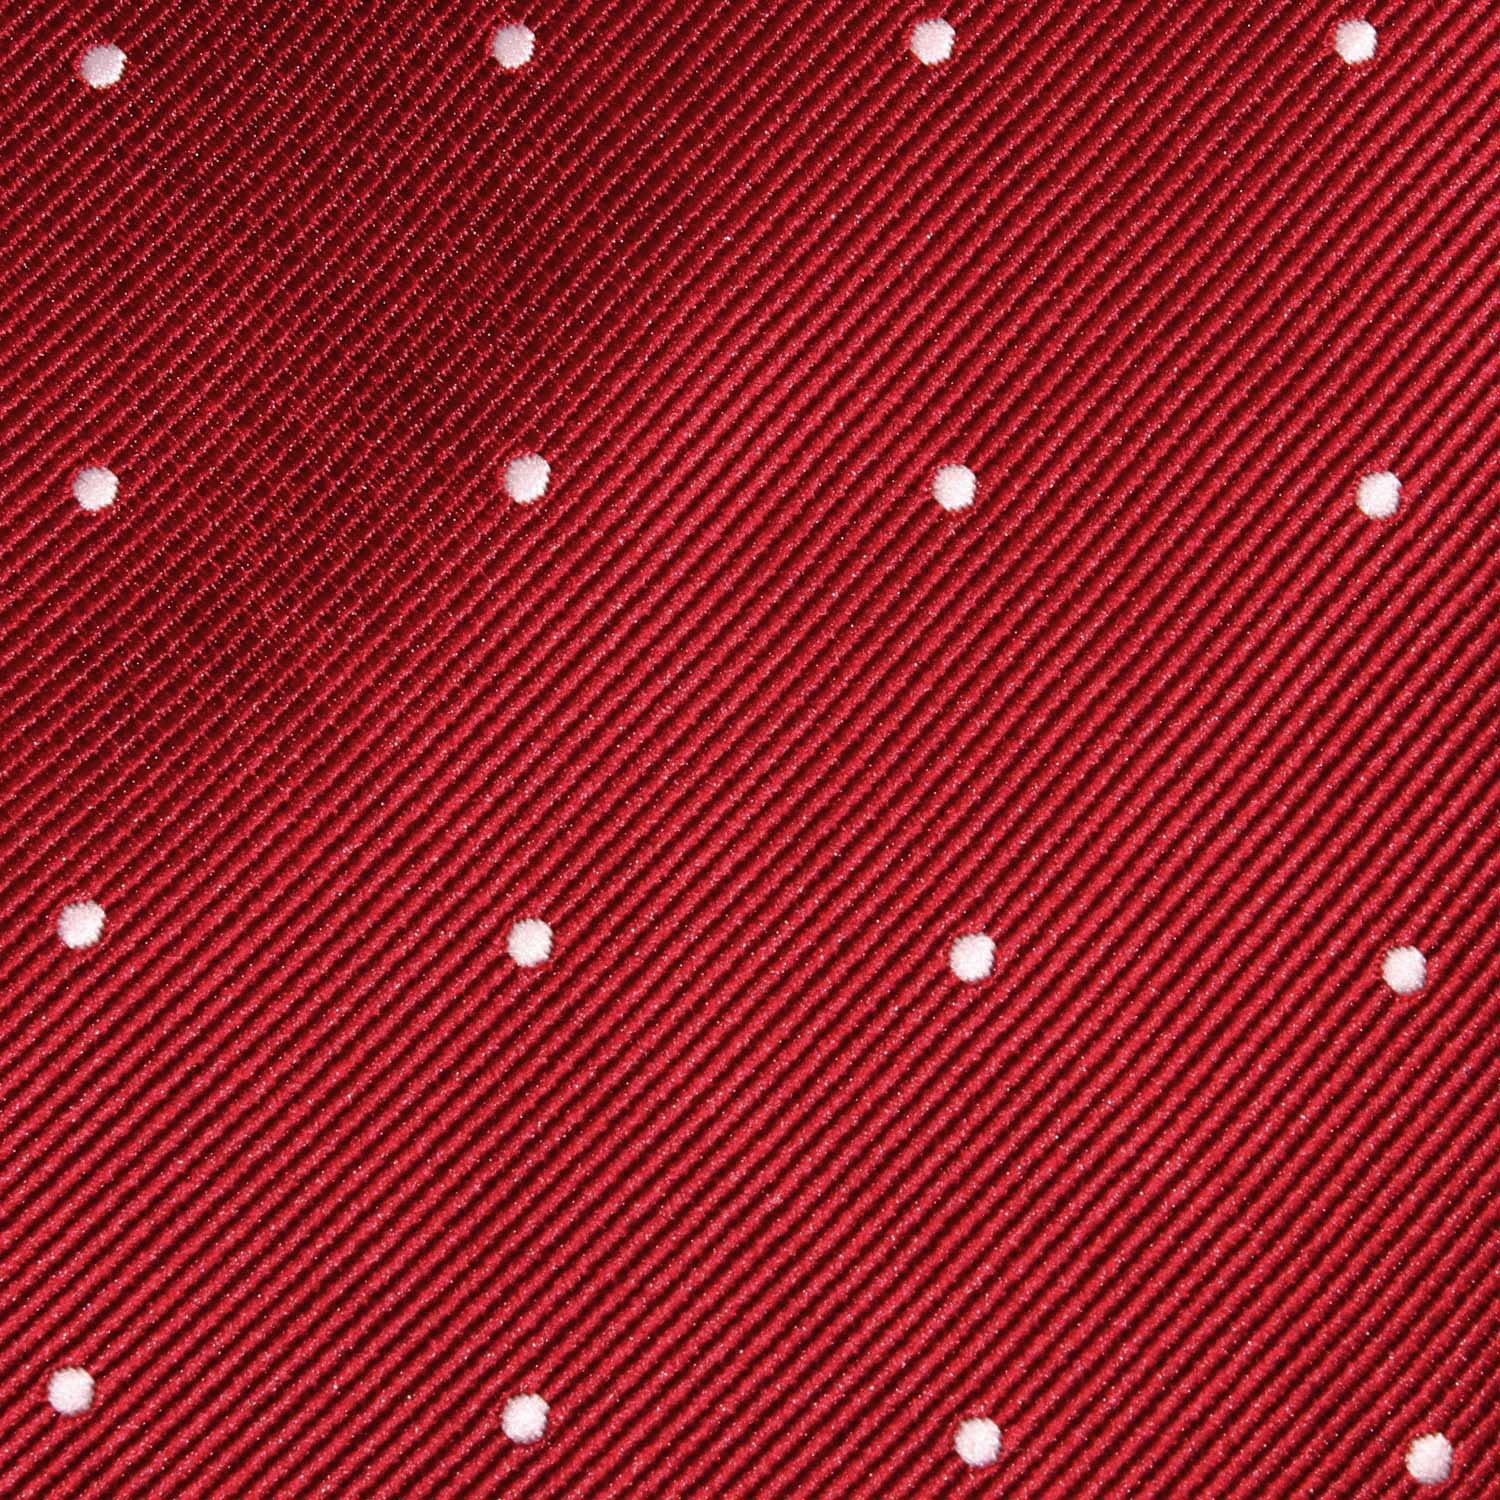 Maroon with White Polka Dots Fabric Pocket Square M045